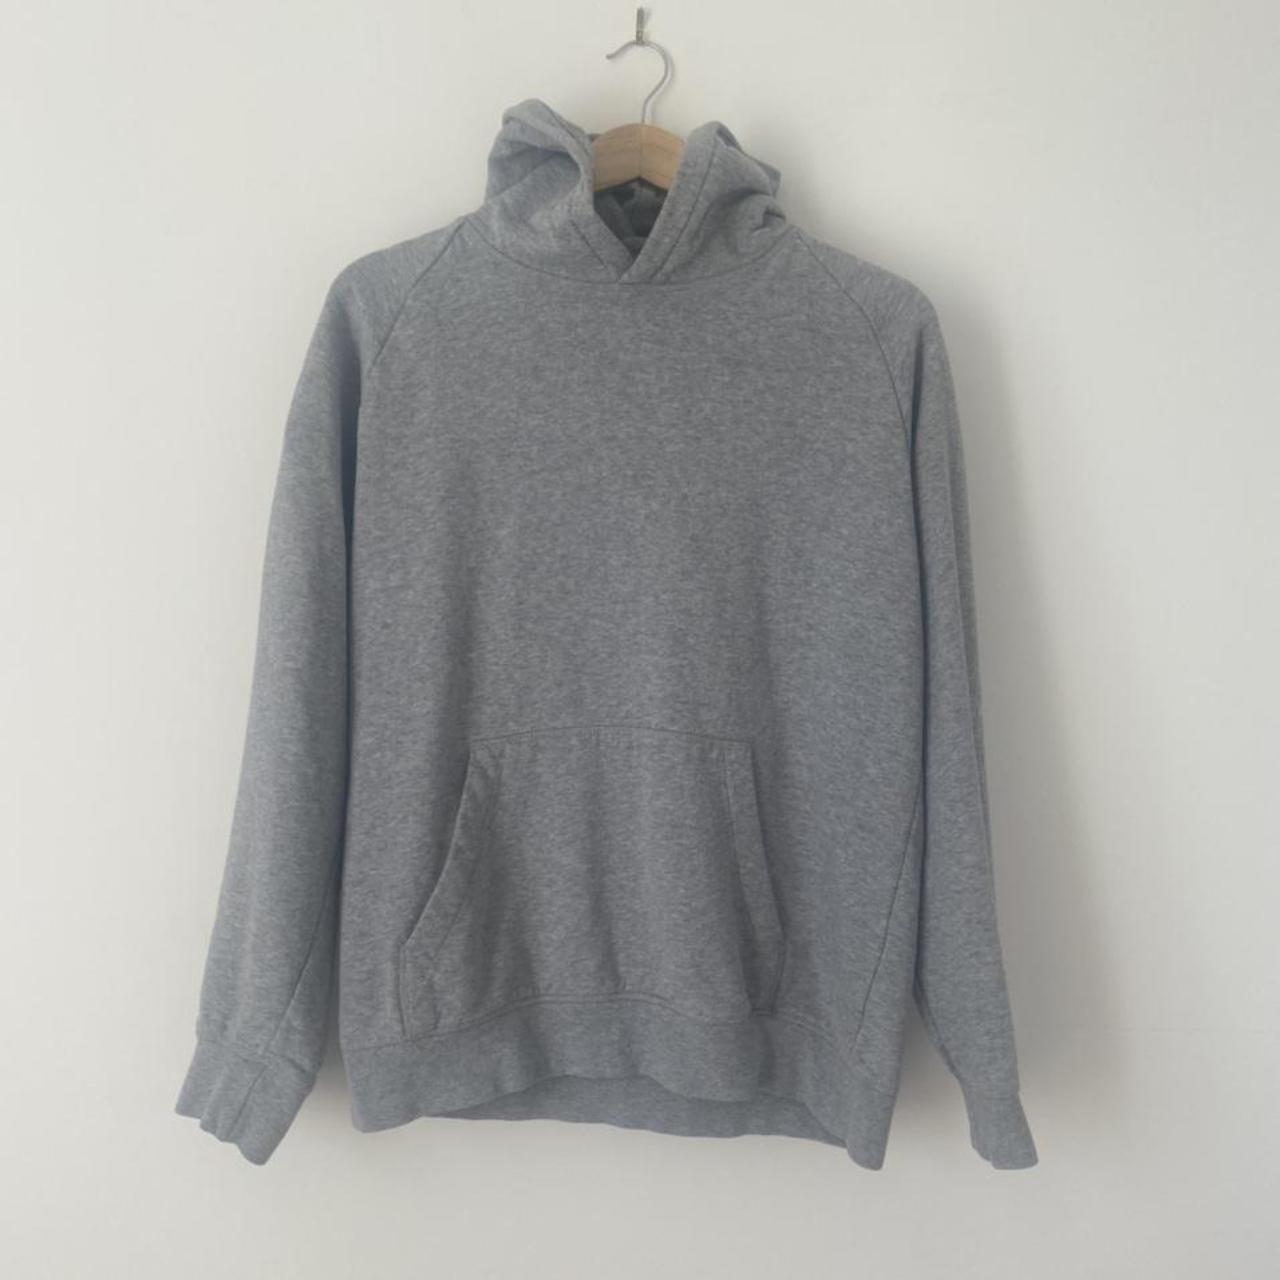 Product Image 1 - H&M basic grey hoodie with